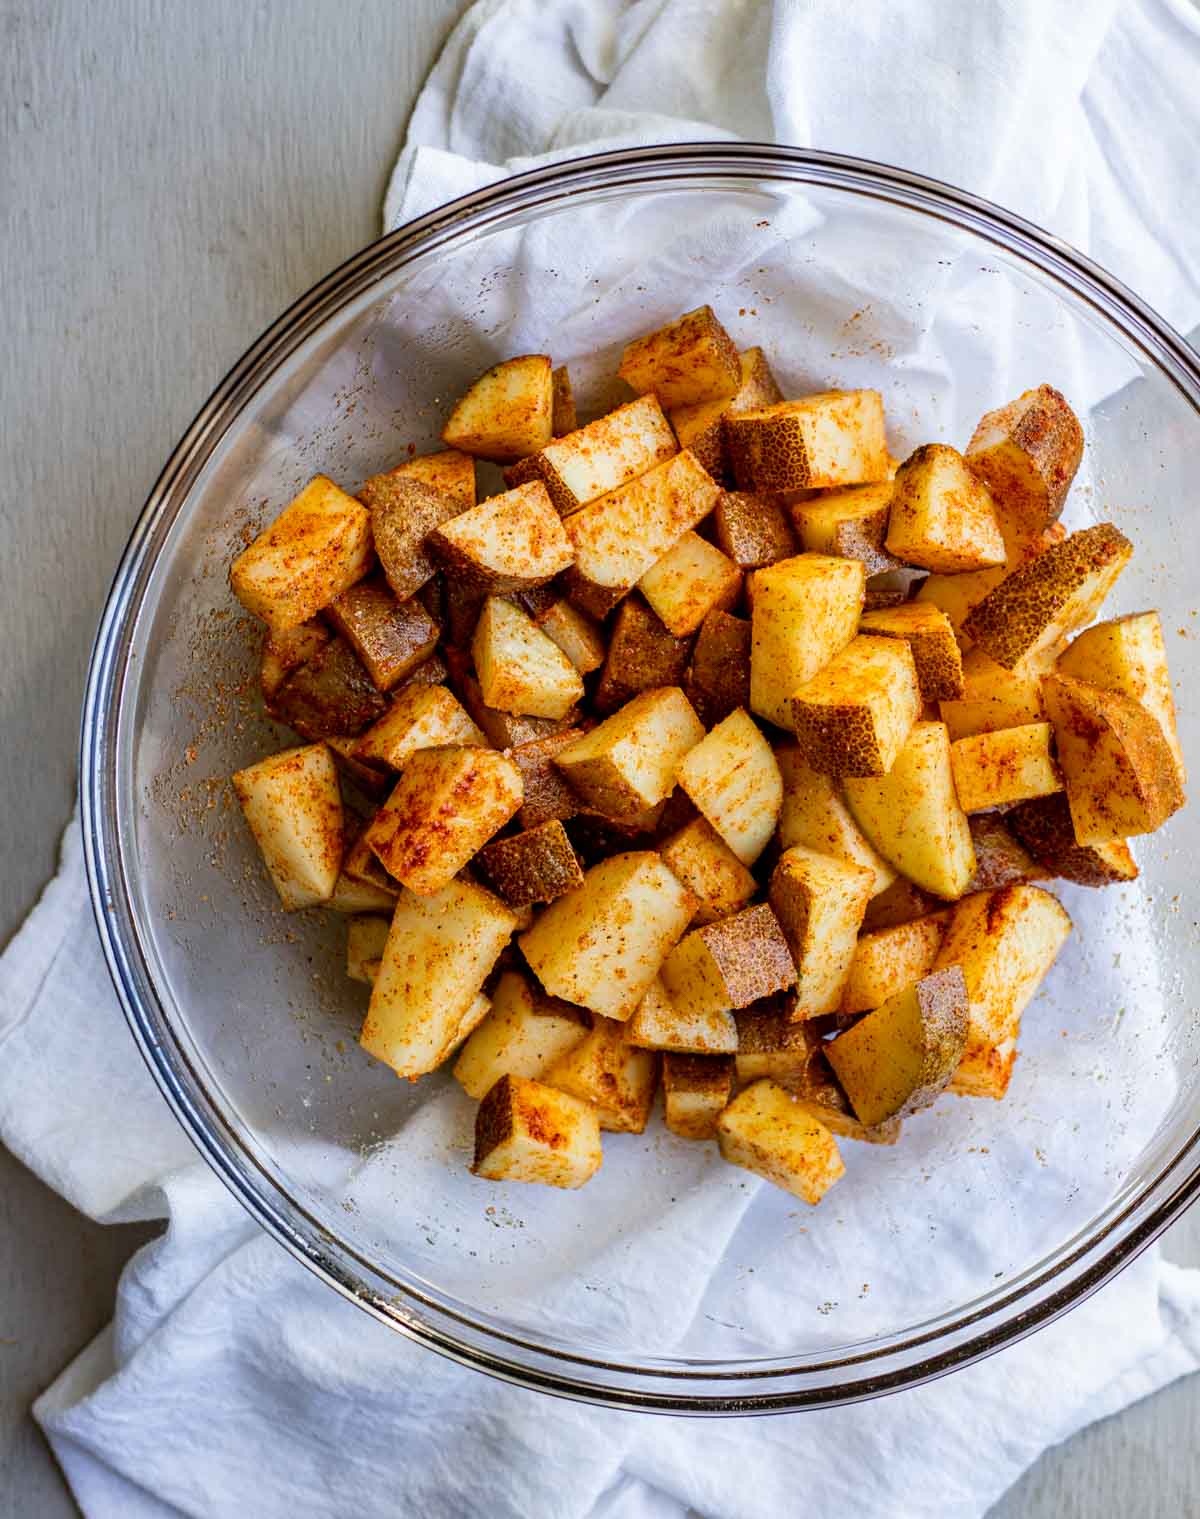 Raw cubed potatoes in a glass bowl and tossed with oil and seasonings.